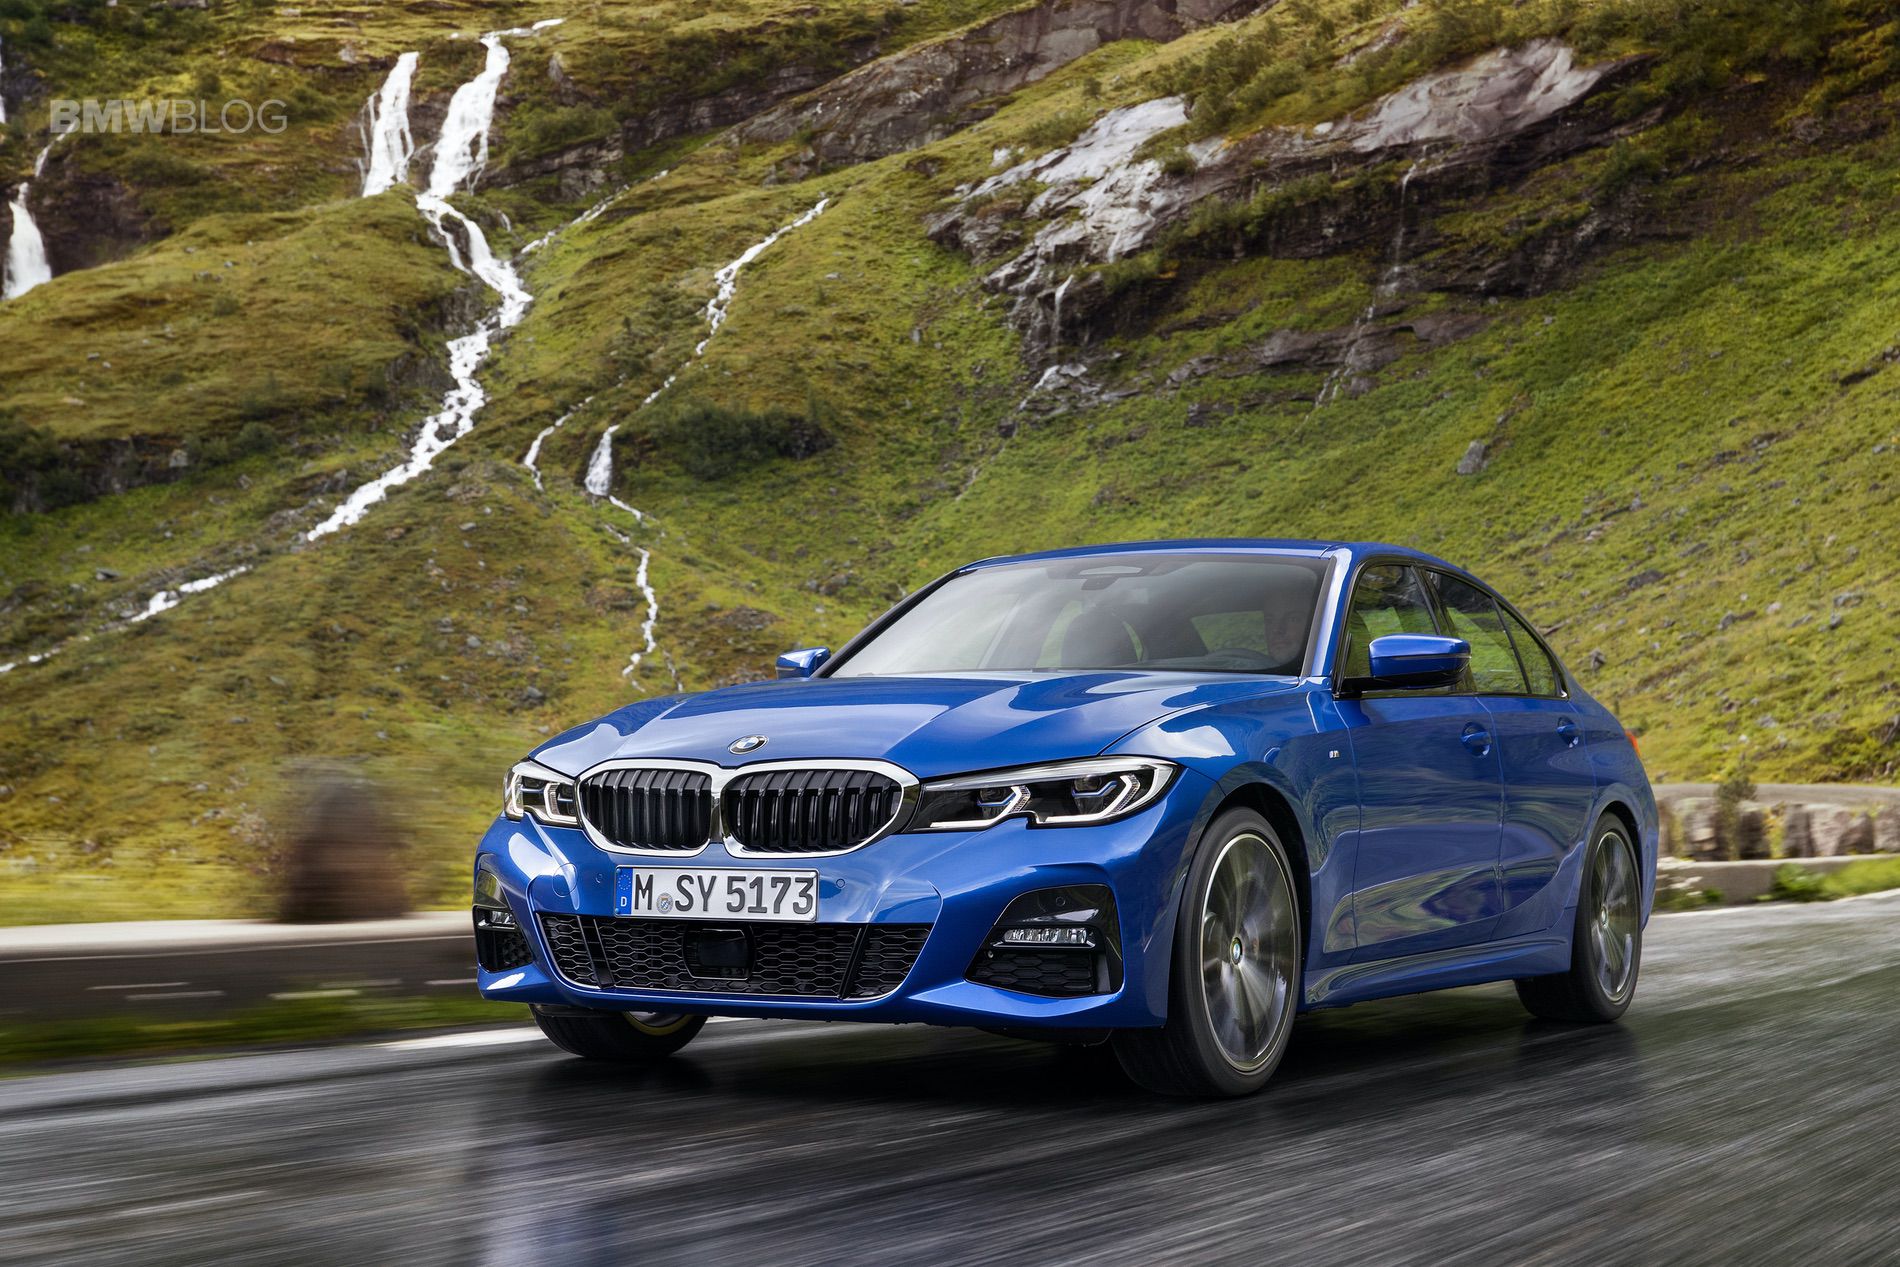 Will the BMW 330i be the best pick of the range?